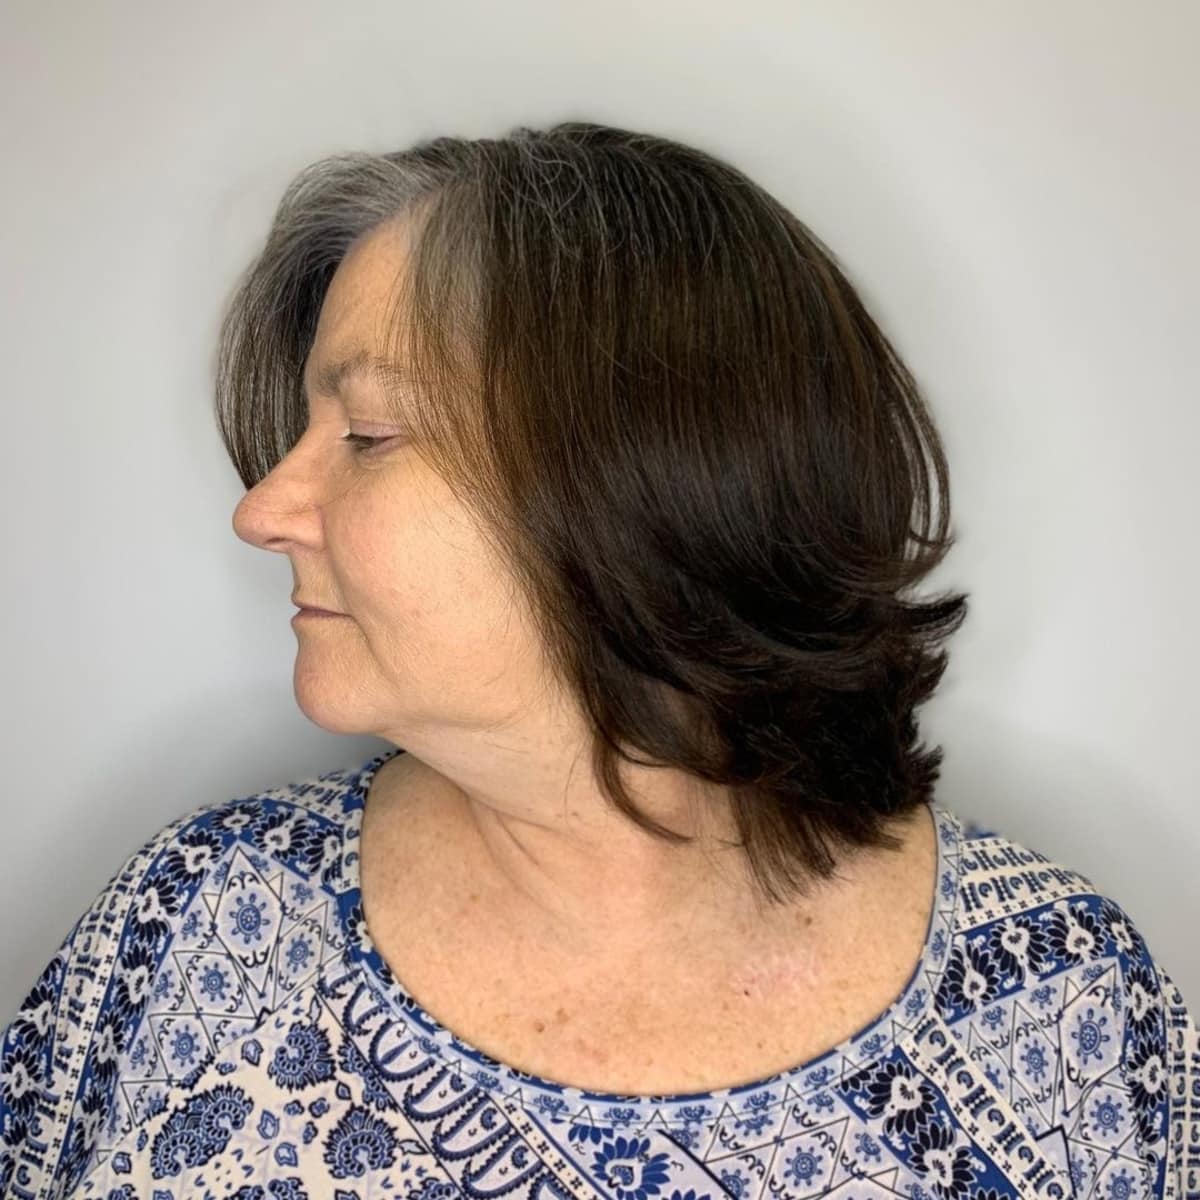 Short to medium cut for a woman over fifty with thin hair